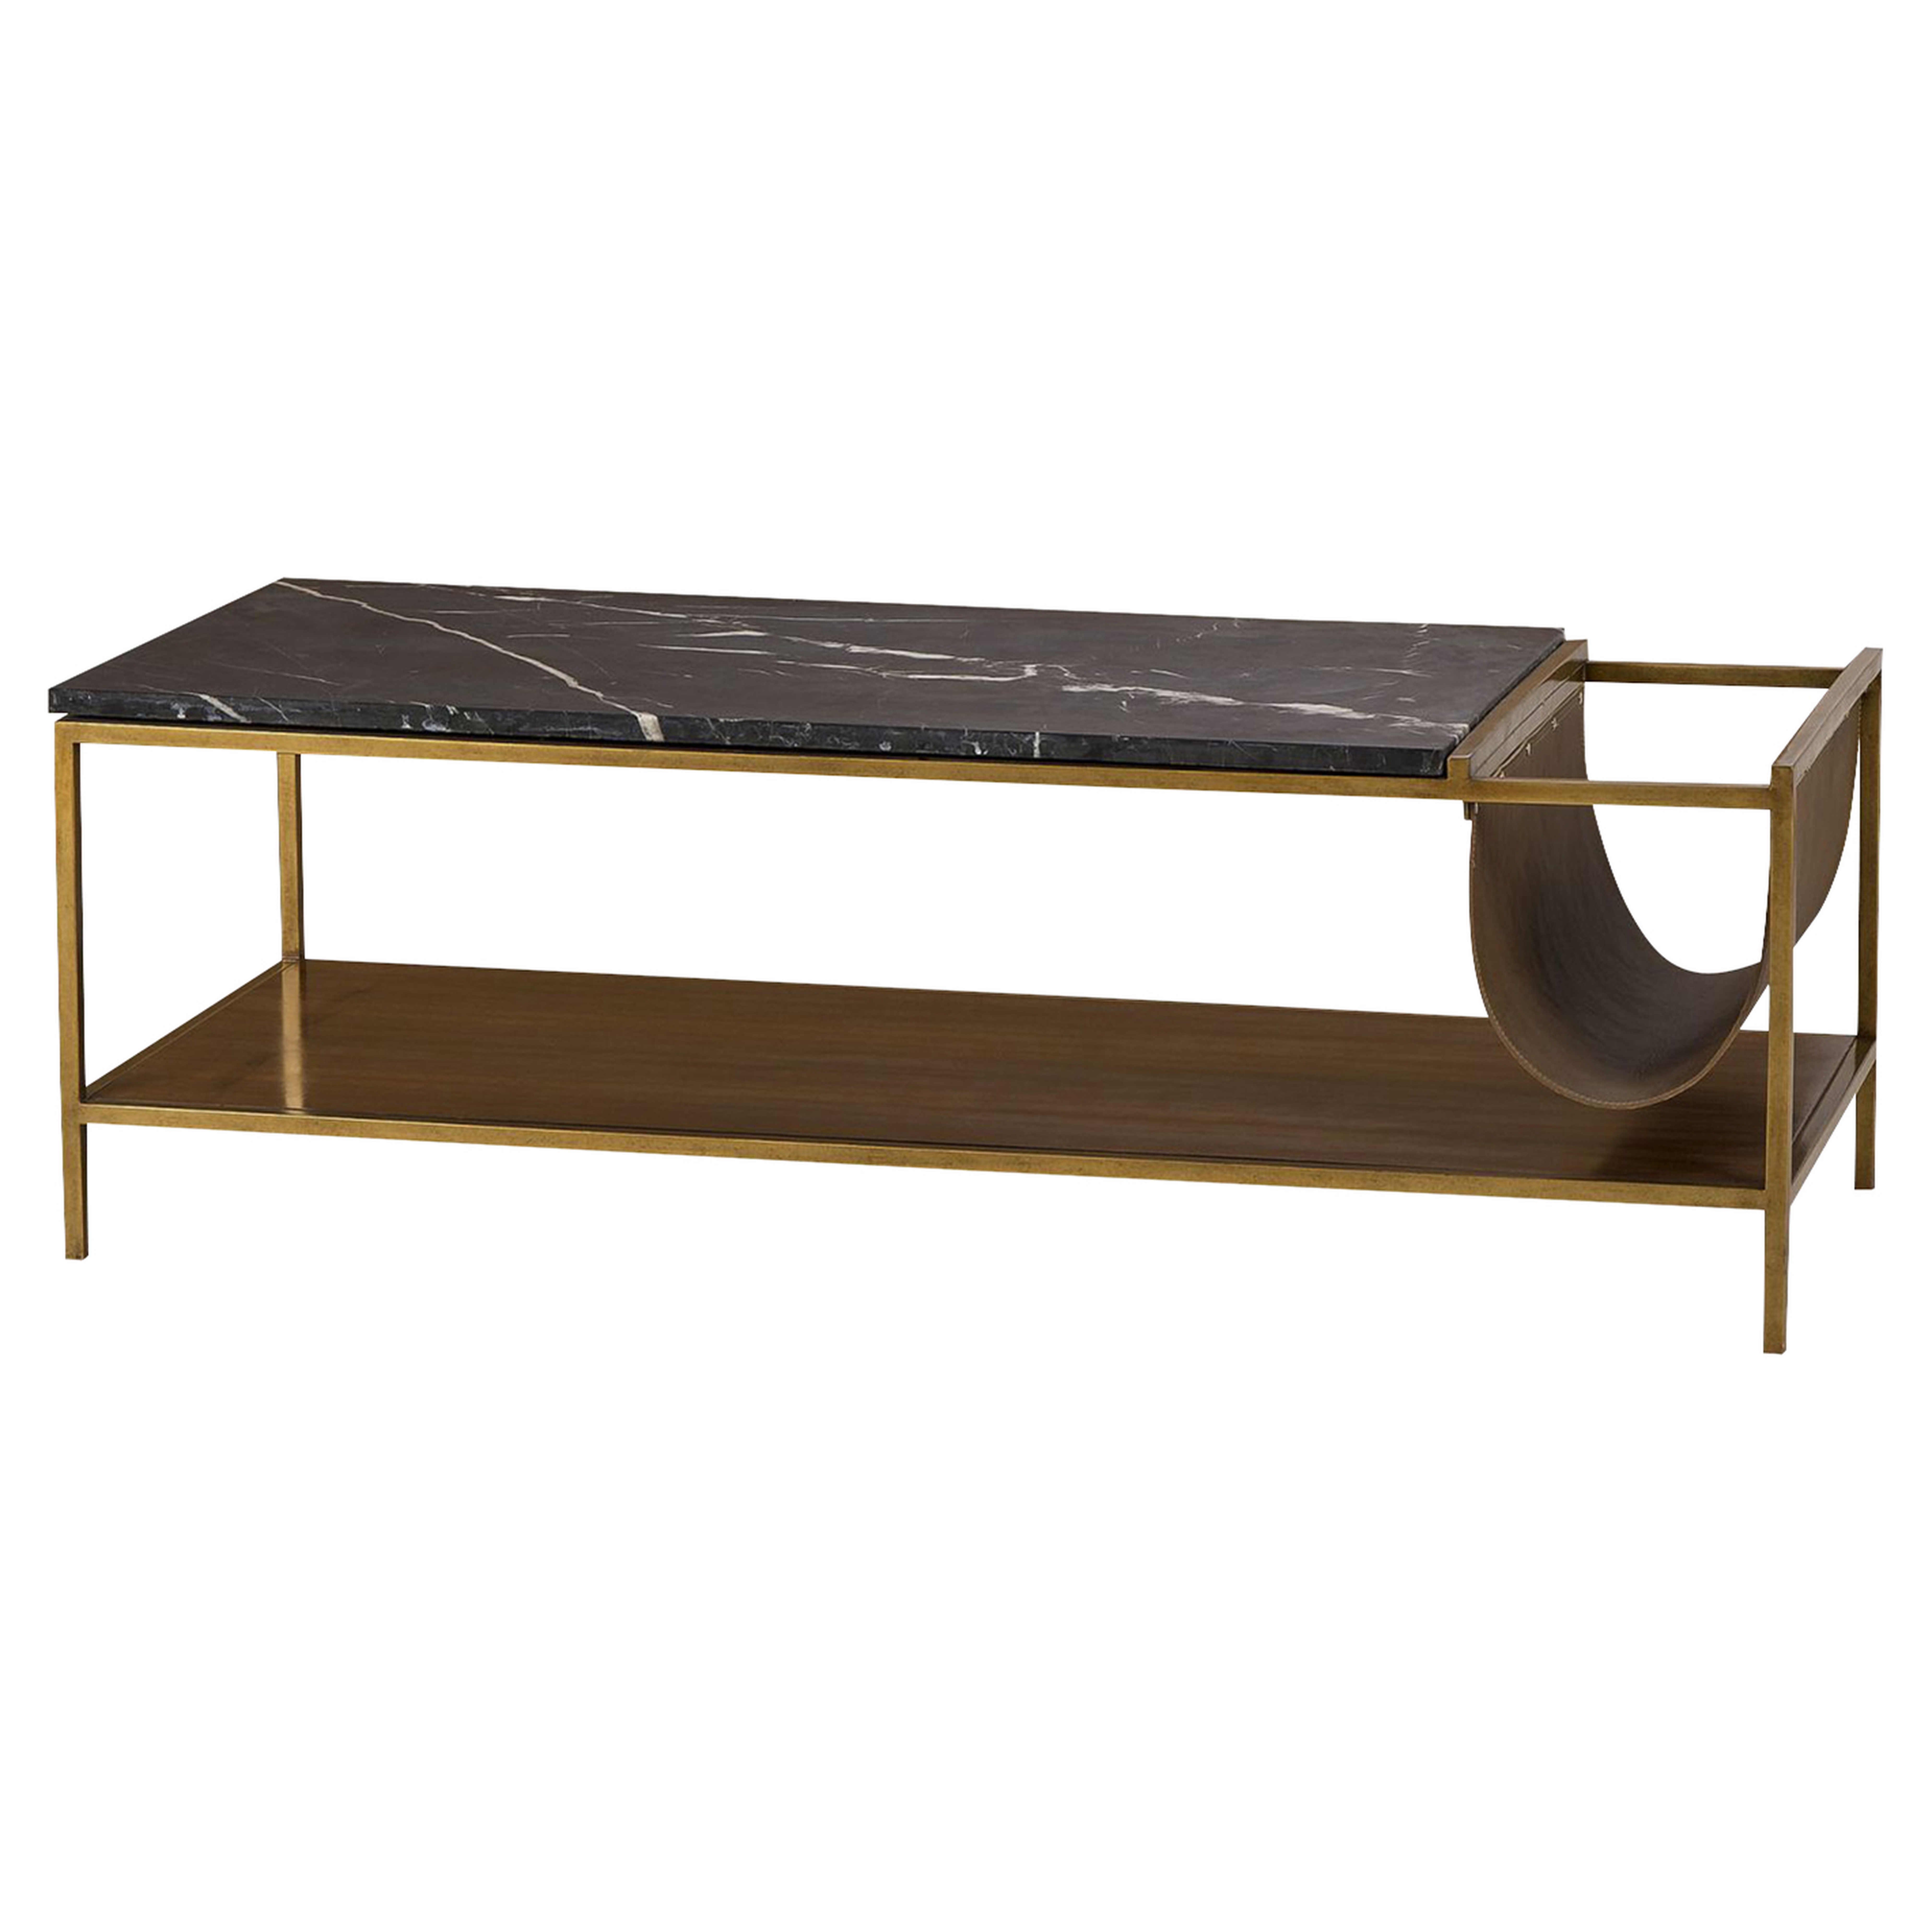 Resource Decor Copeland Mid Century Leather Black Marble Walnut Coffee Table - Kathy Kuo Home